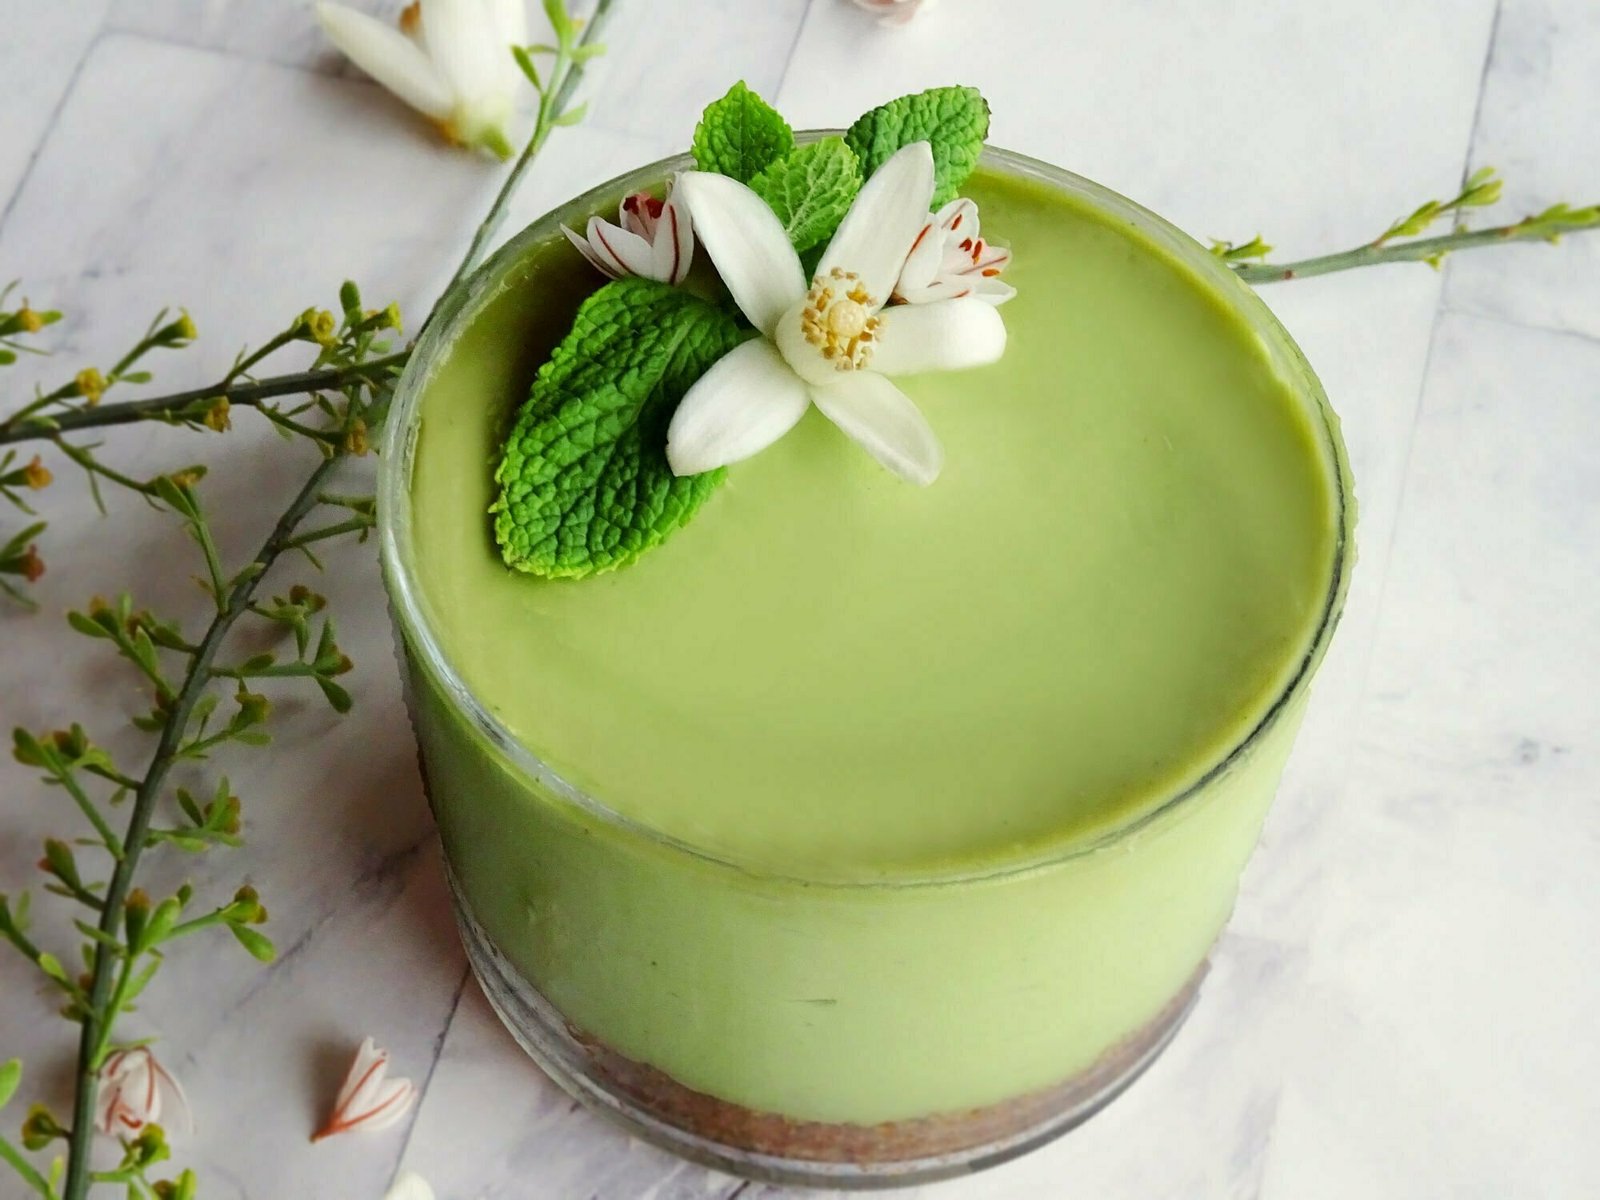 A small avocado and lime cheesecake sits in a short glass that's garnished with a few sprigs of fresh mint and an orange blossom